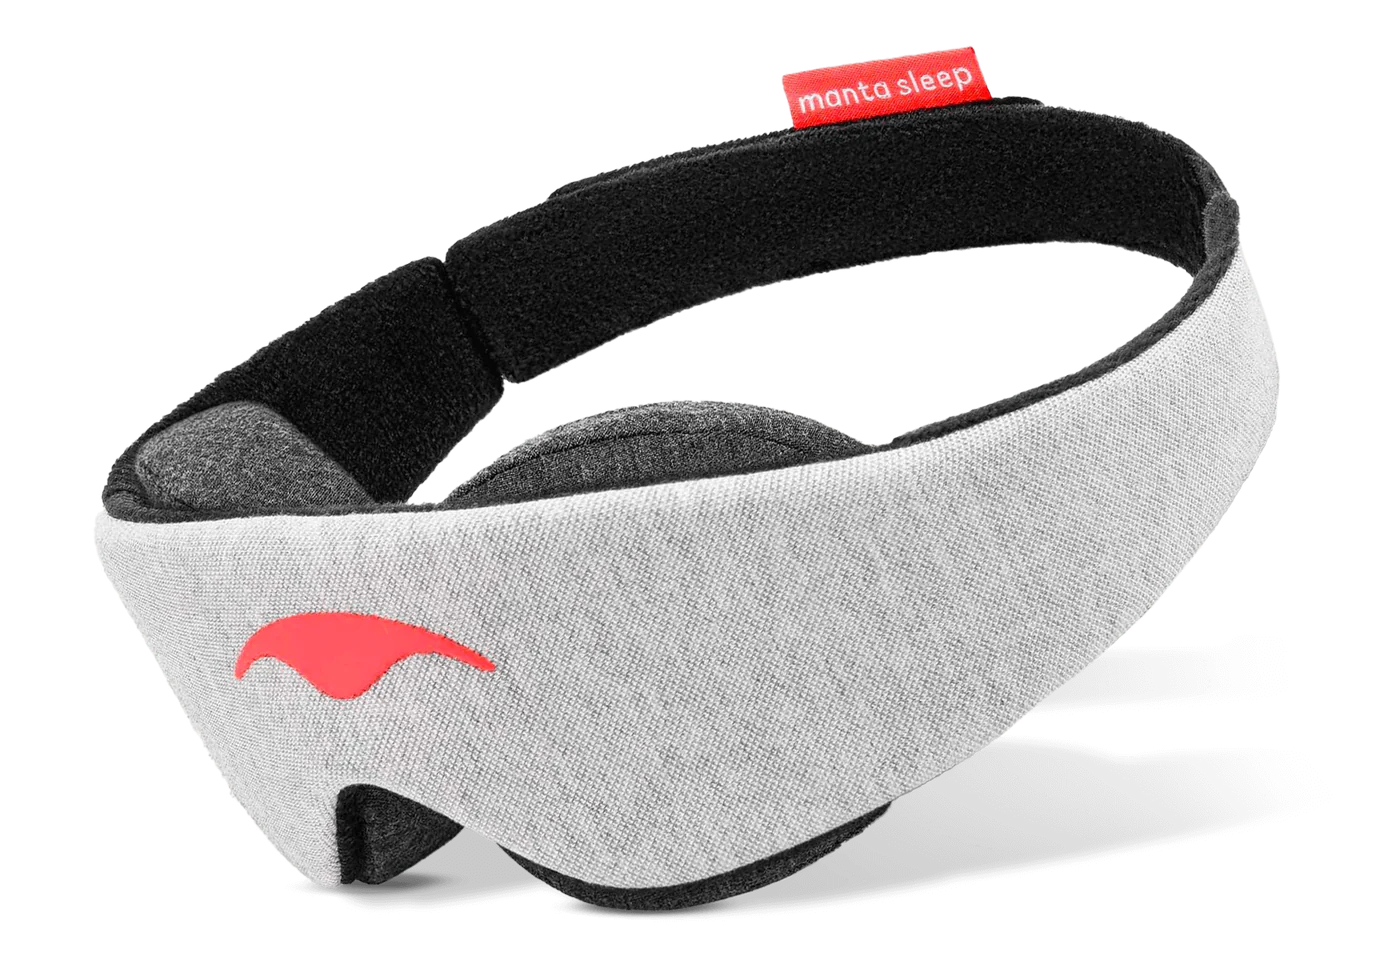 An adjustable cotton sleep mask with eye cups made with combination materials.